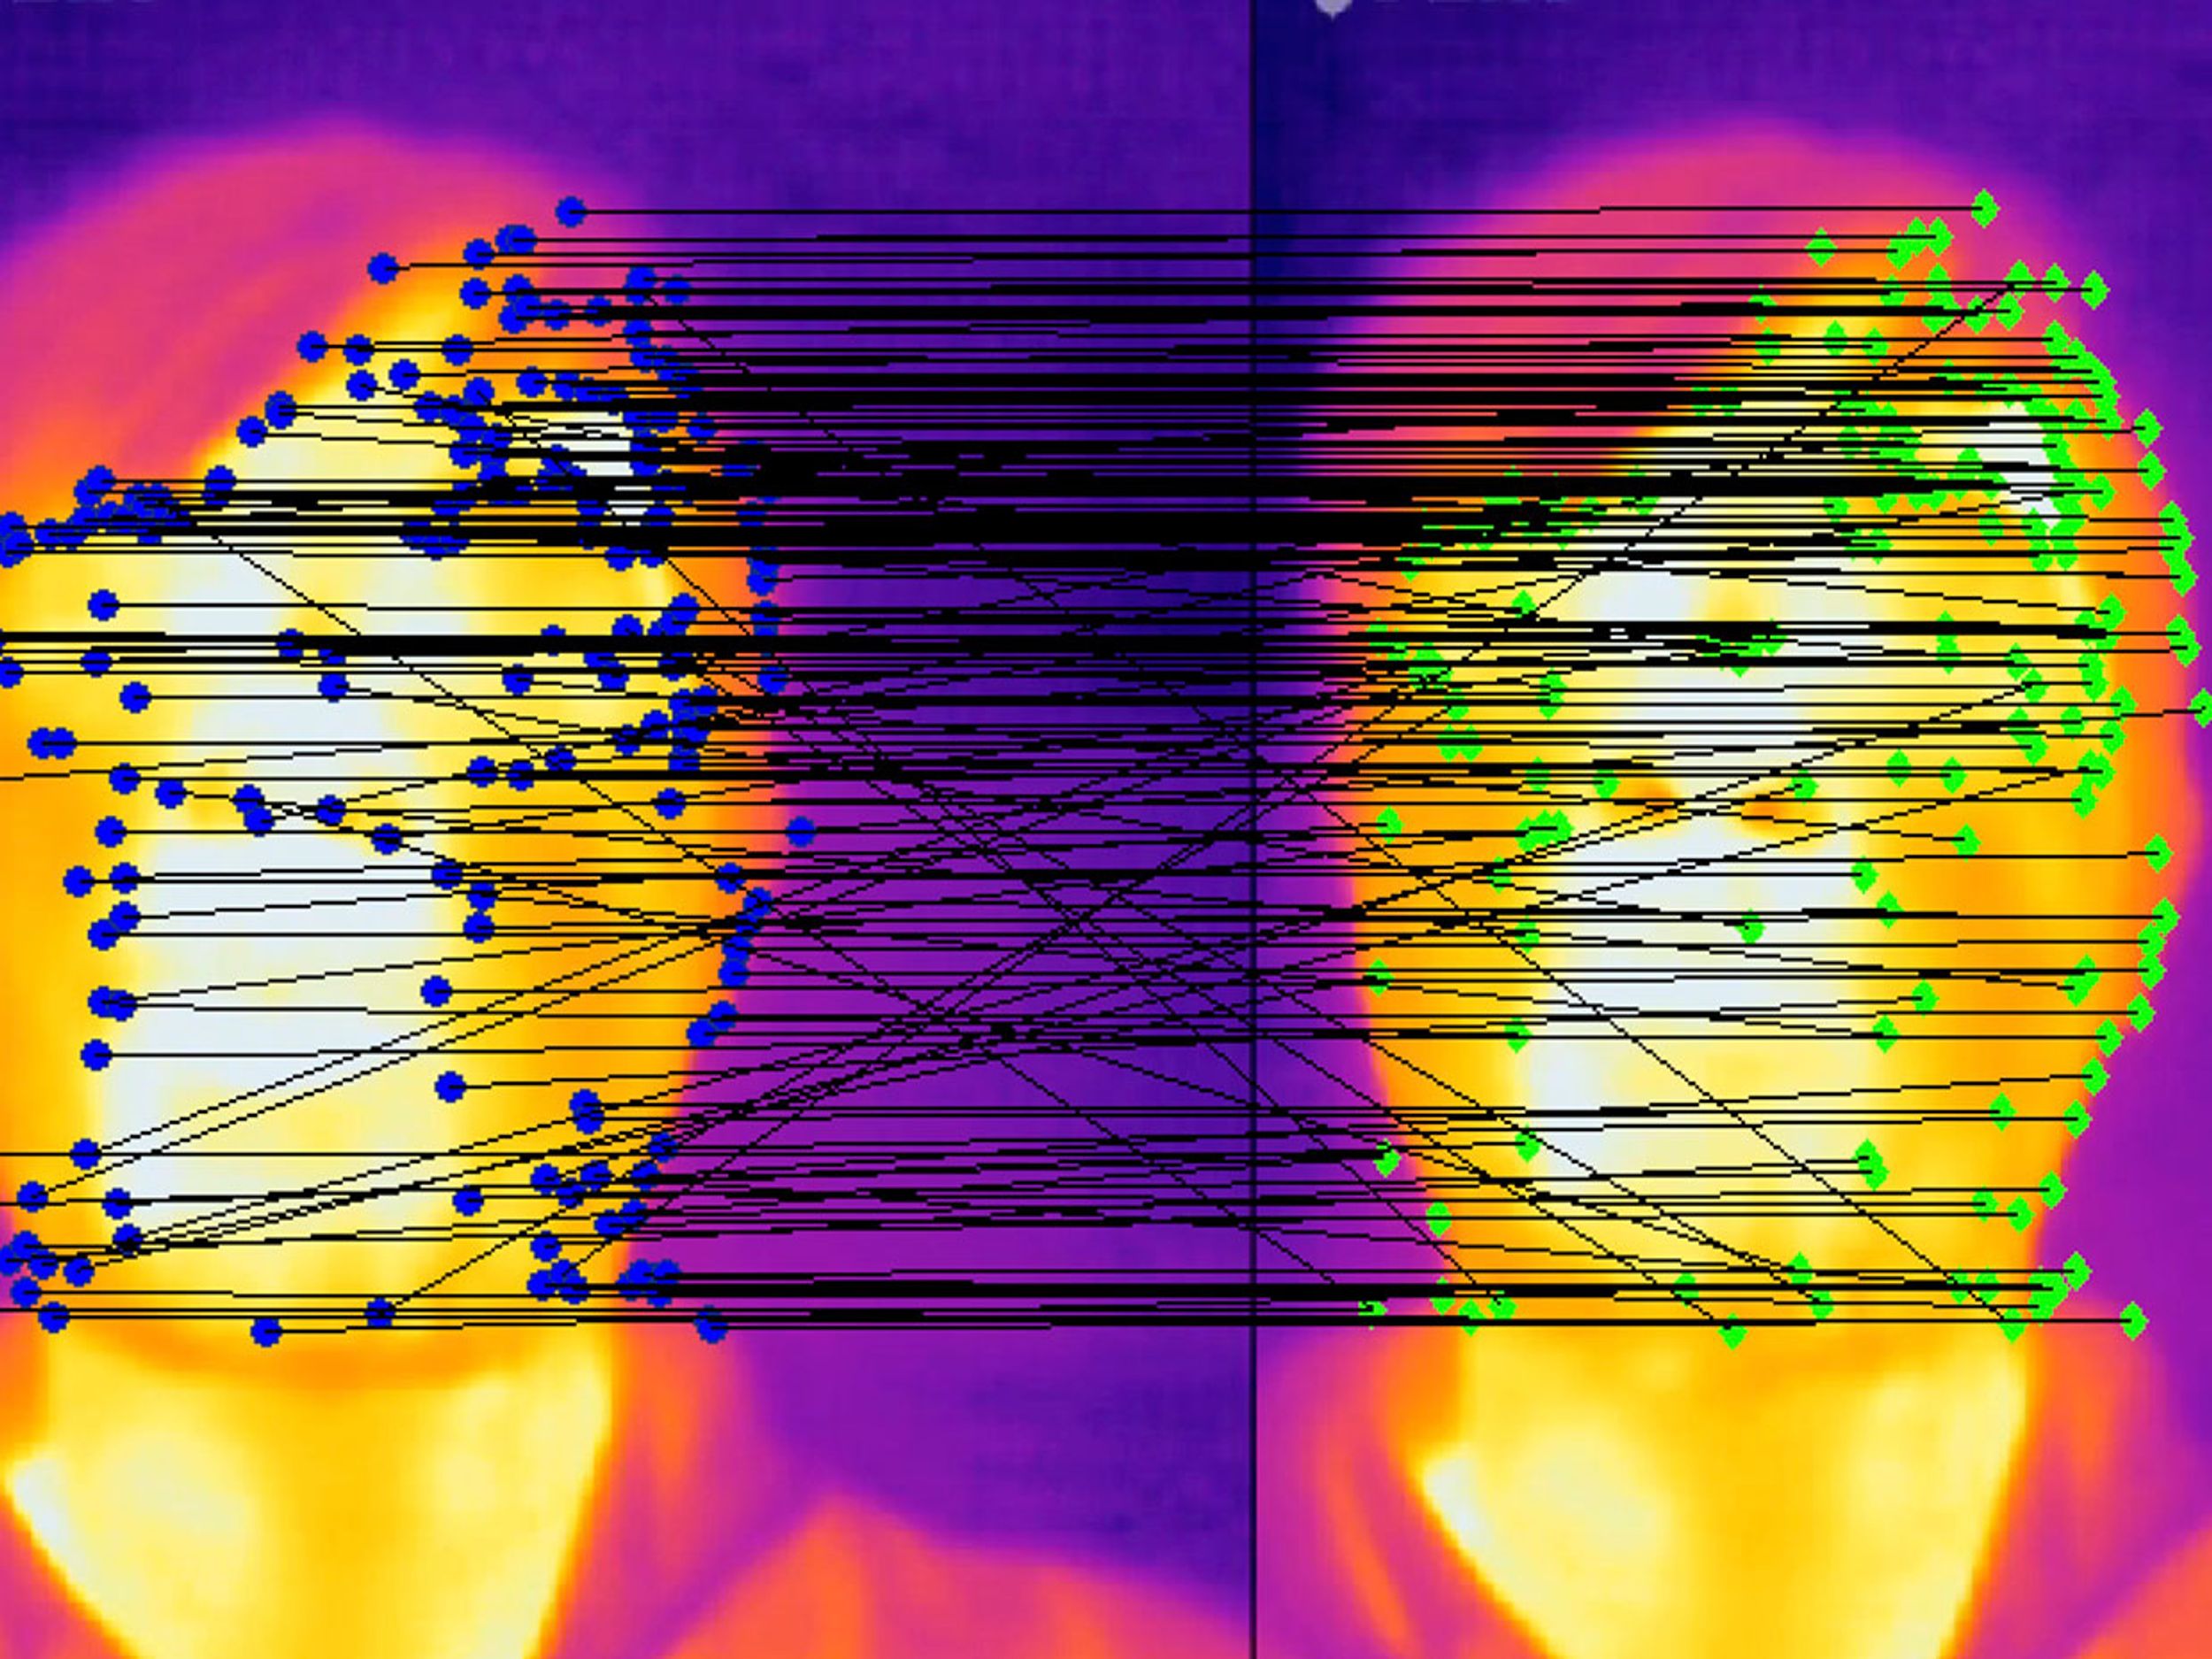 Tracking thermal faces